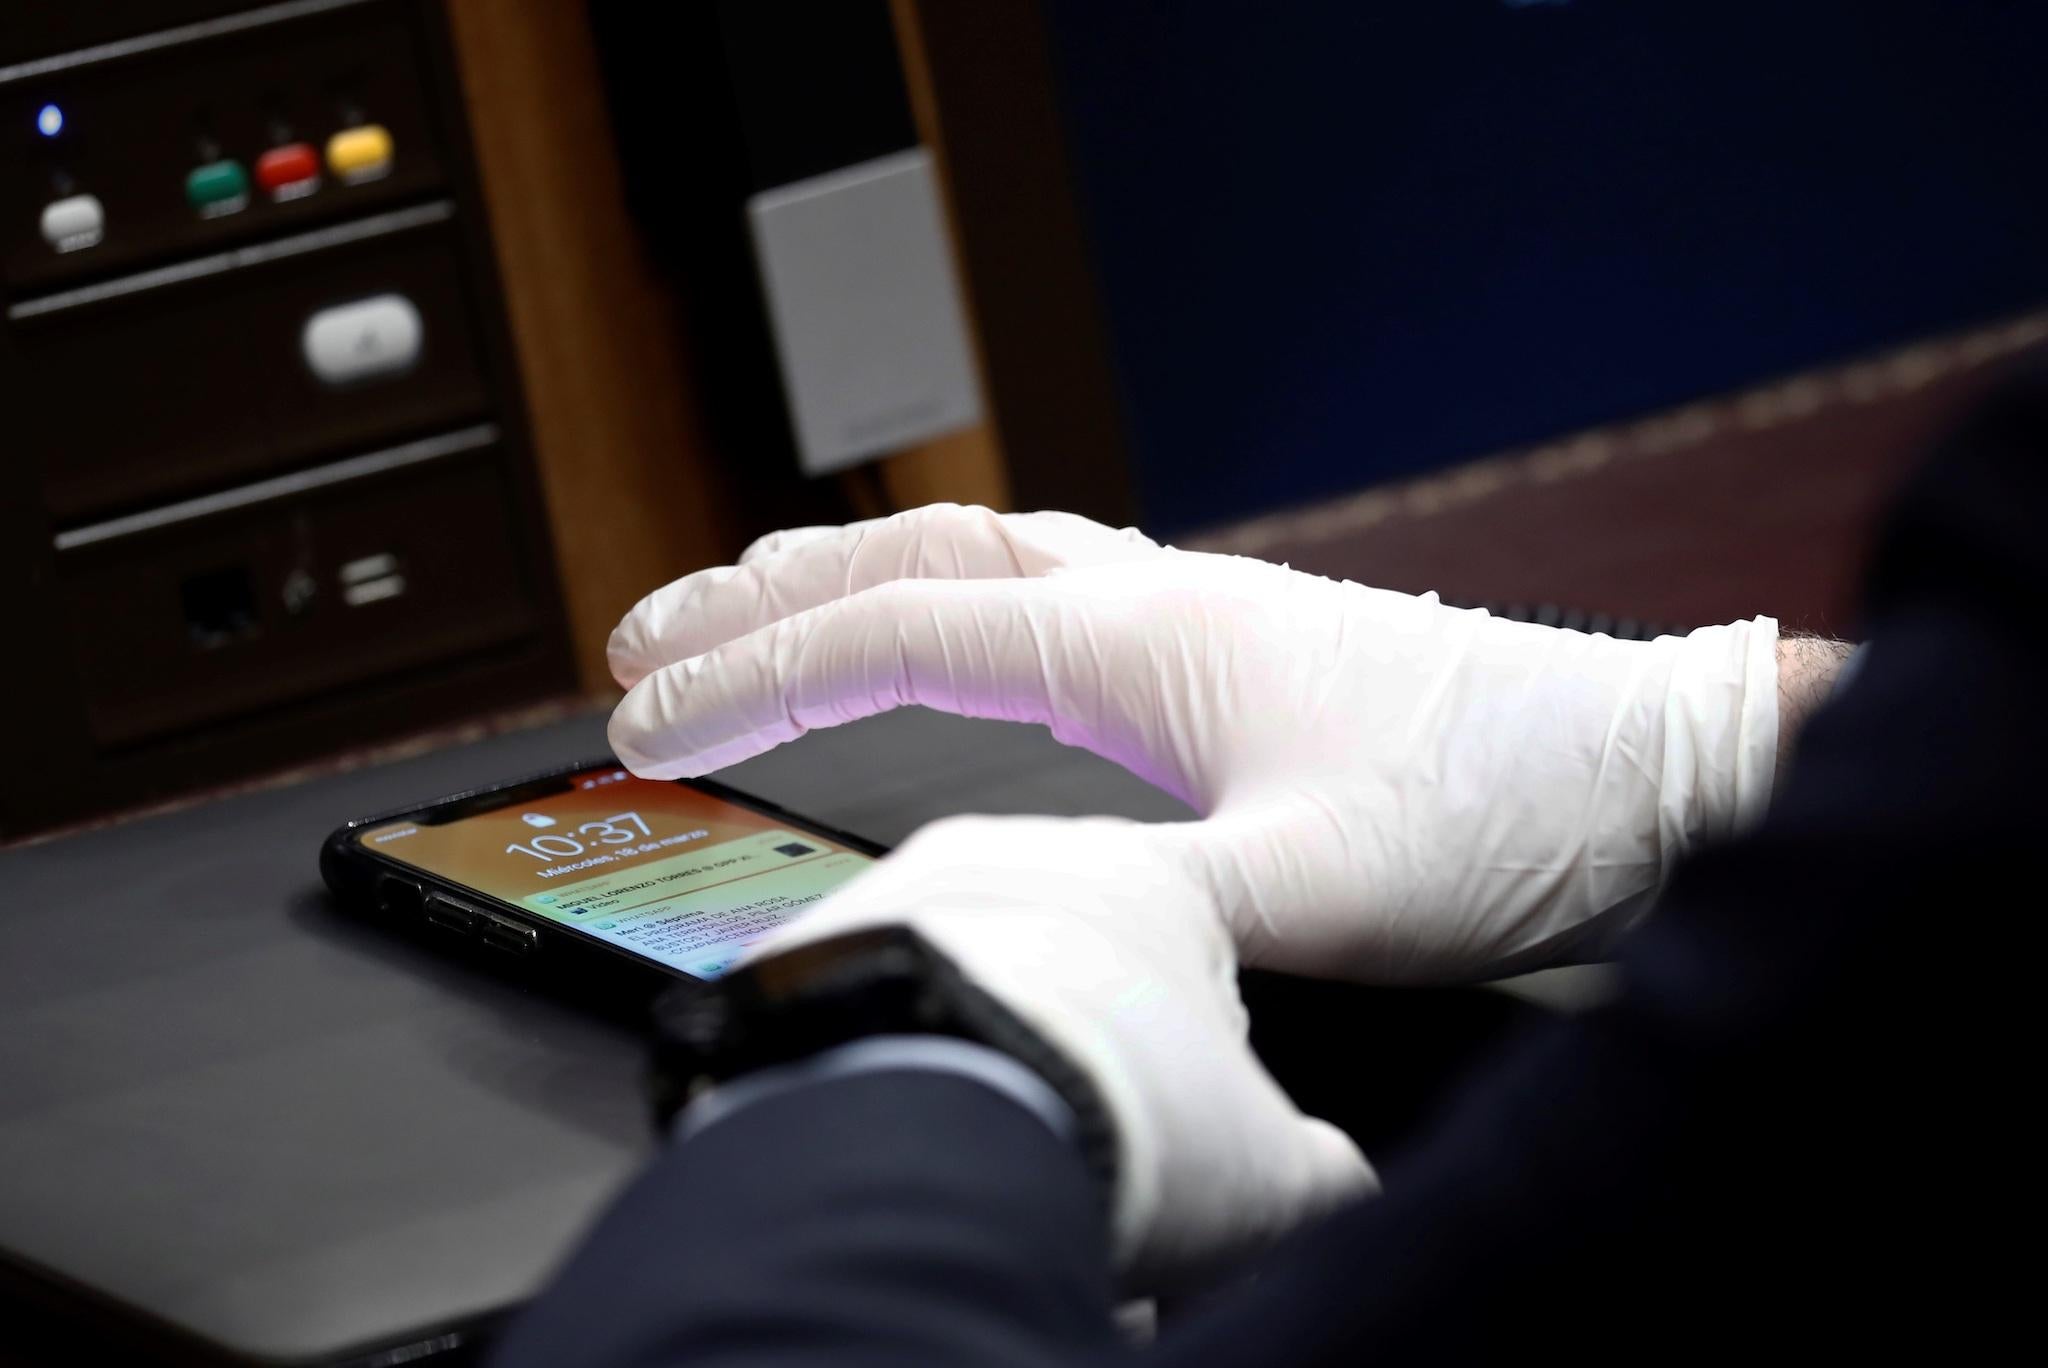 A Member of Parliament using protective gloves uses a smartphone during a session at the Spanish Parliament in Madrid to explain the Government's declaration of a State of Alert and the measures taken to mitigate the coronavirus COVID-19 consequences on March 18, 2020